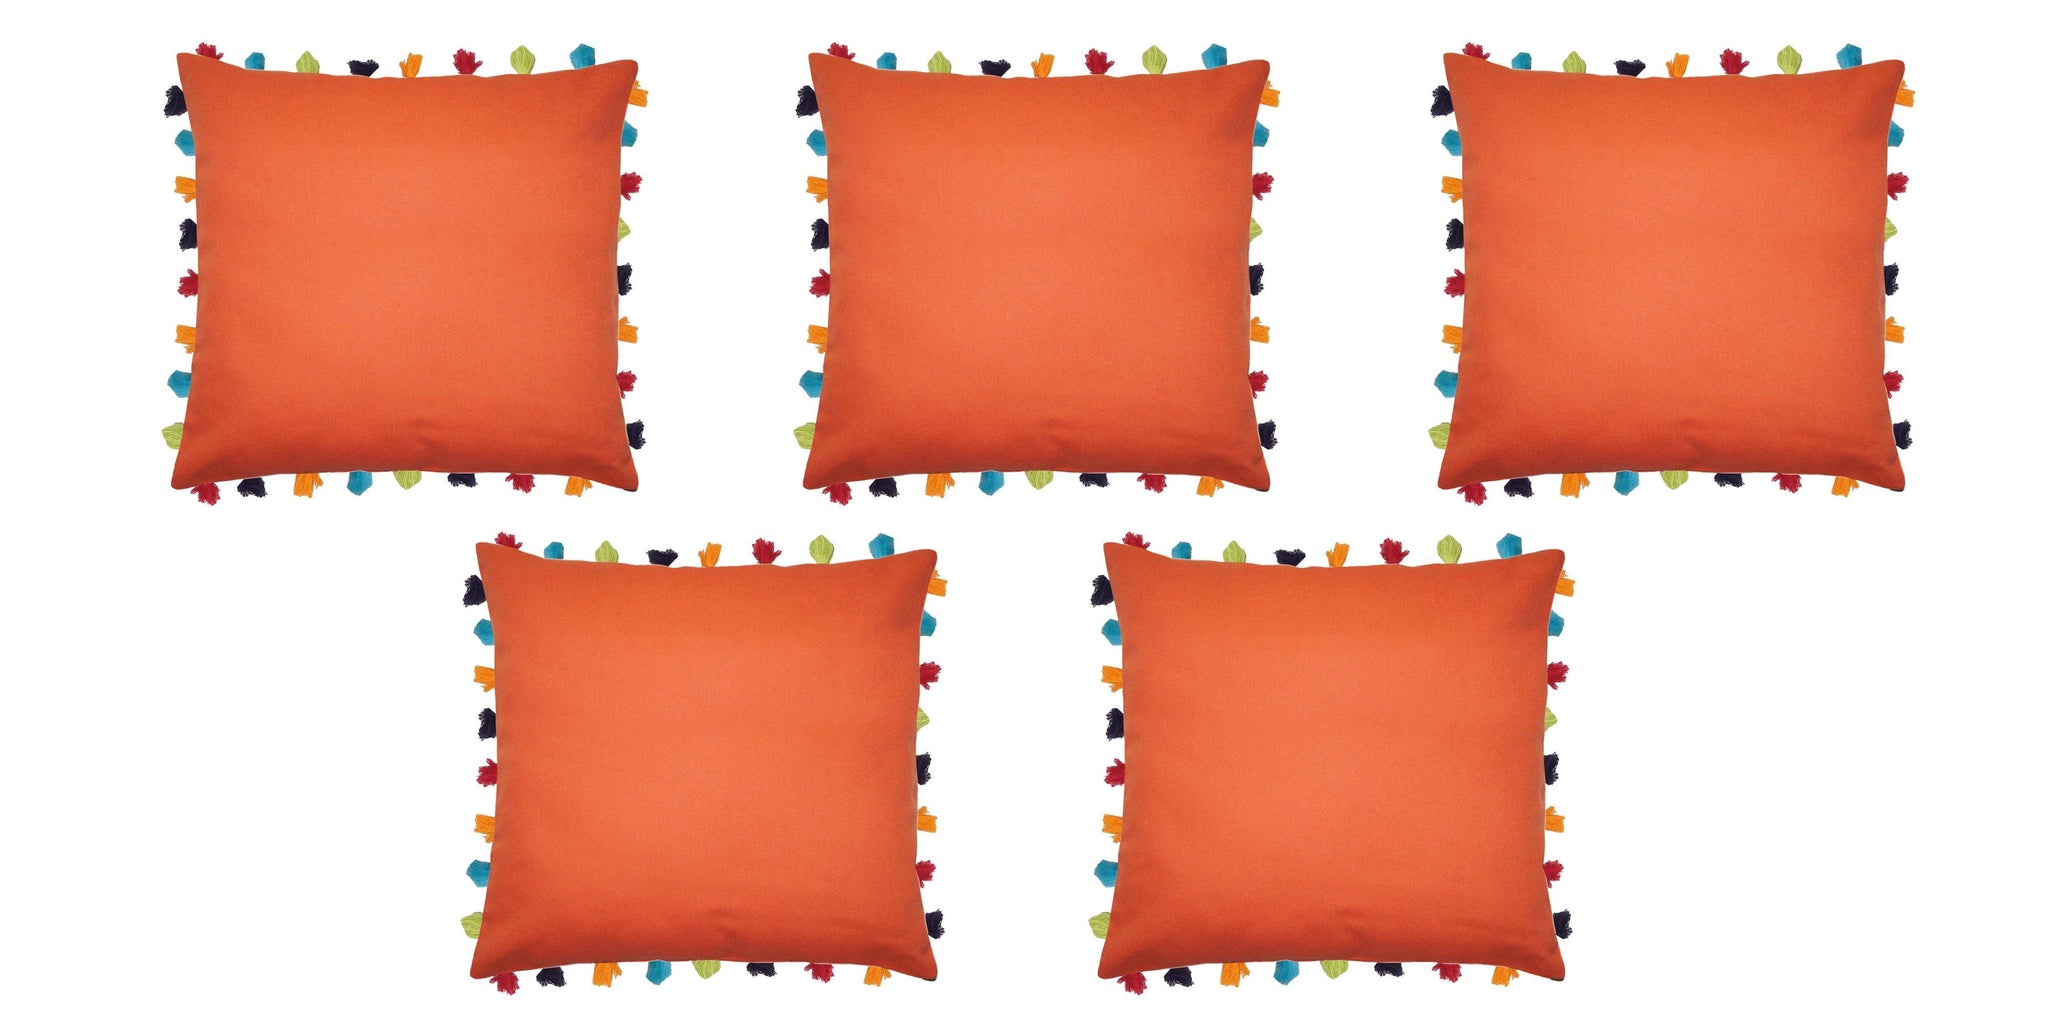 Lushomes Red Wood Cushion Cover with Colorful tassels (5 pcs, 24 x 24”) - Lushomes